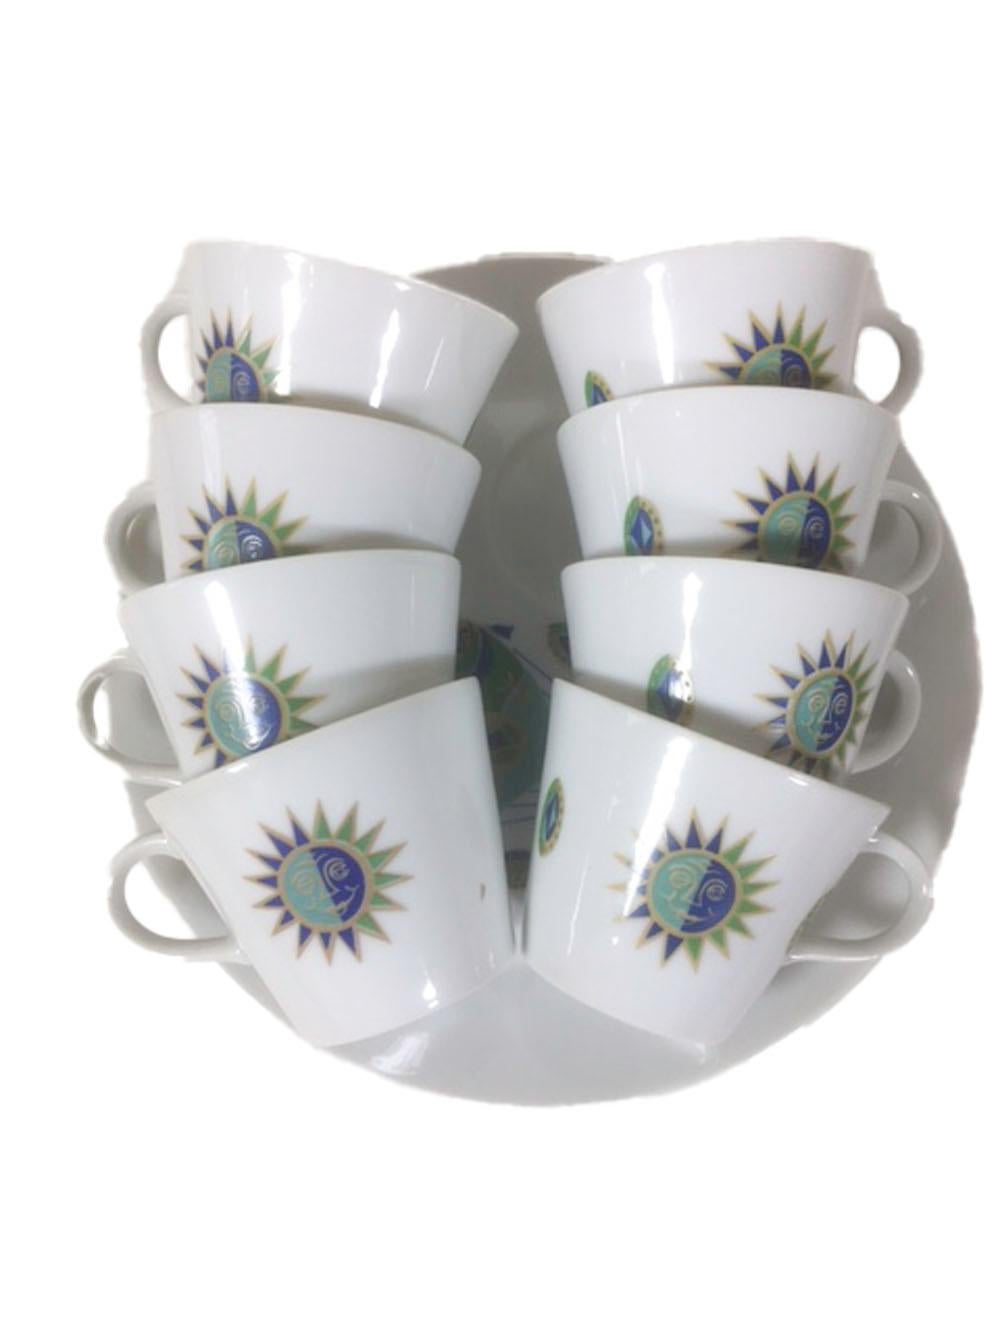 Mid 20th century Georges Briard snack sets, service for 8. In the Fancy Free hot air balloon pattern - each plate has an image of a hot air balloon on a white ground as well as a recess for the cup which is decorated with sun images and other